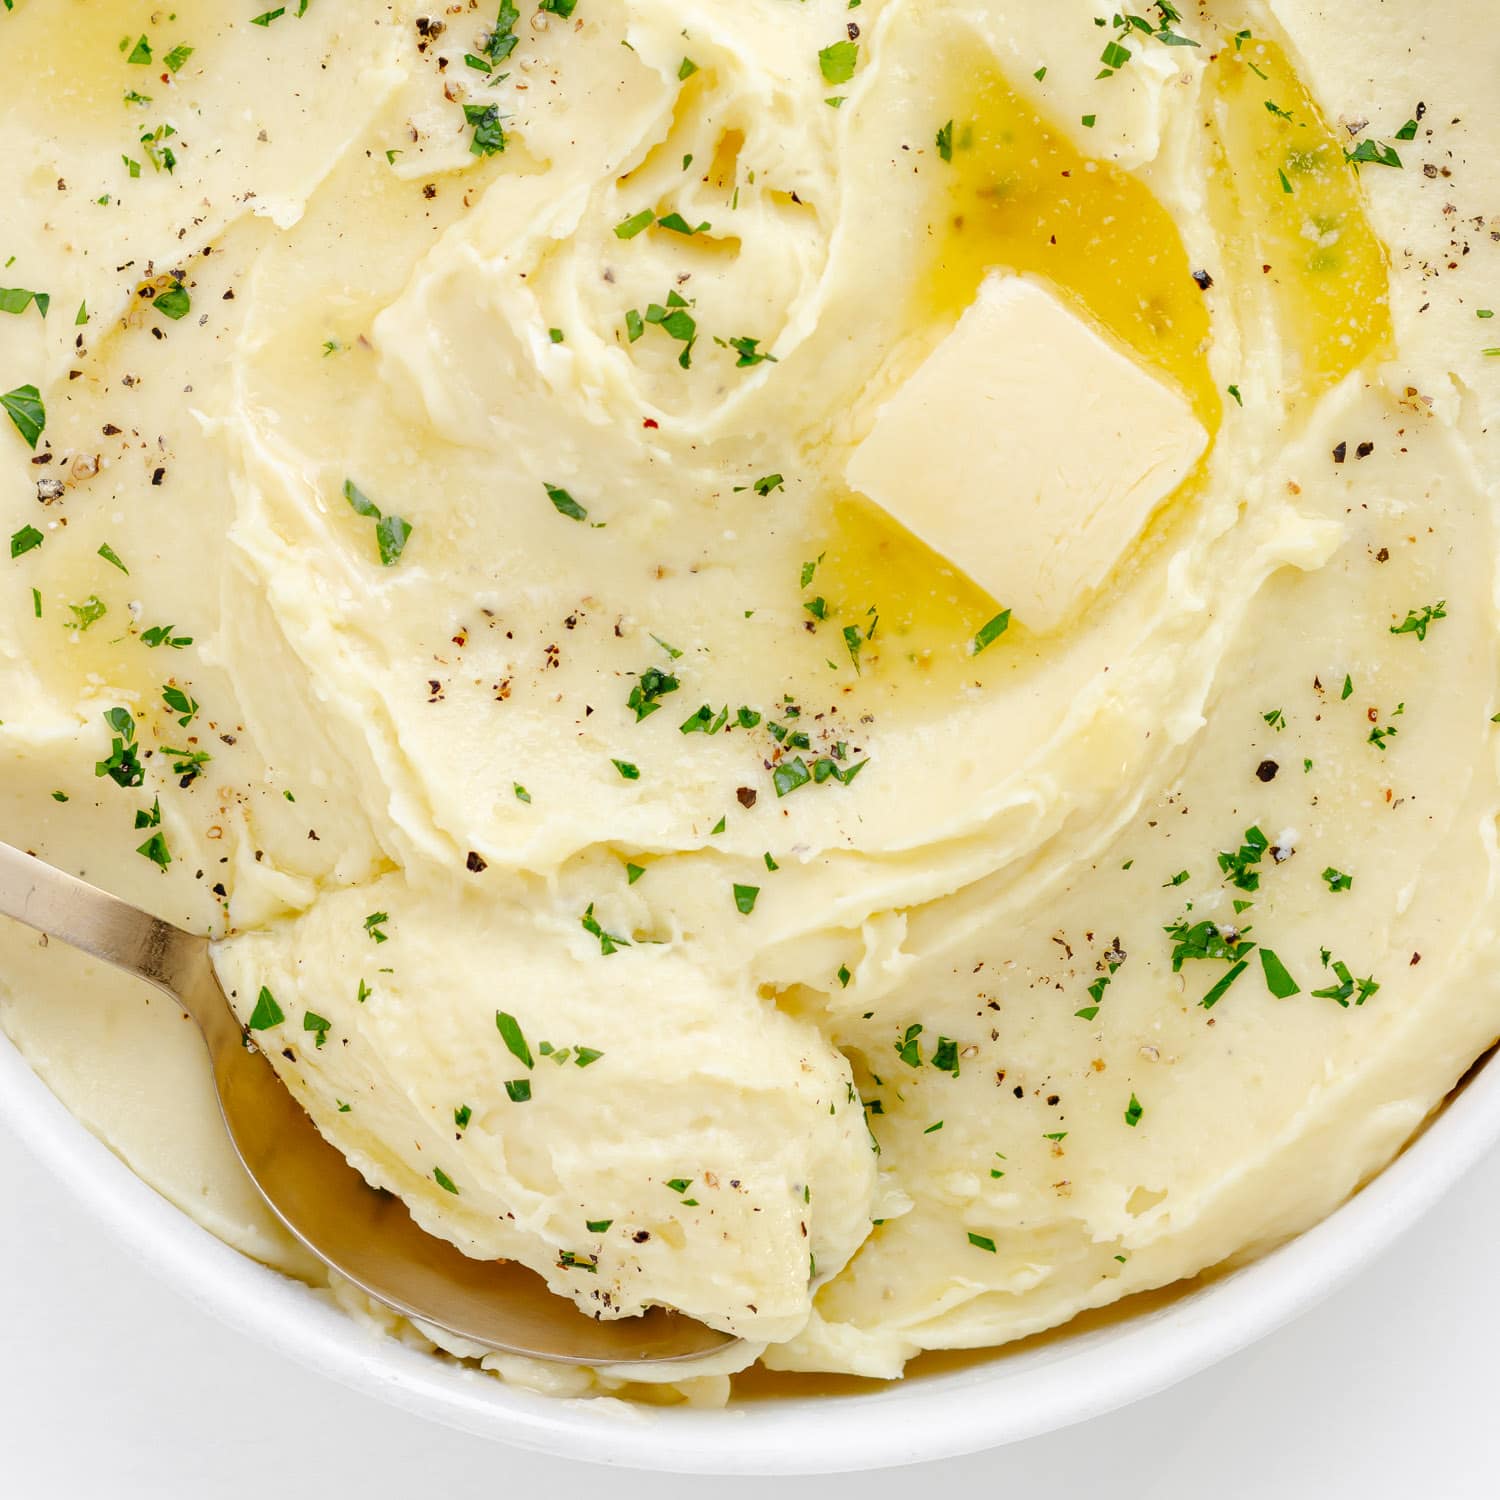 Serving spoon in a bowl of mashed potatoes garnished with melted butter, chopped parsley and cracked pepper.